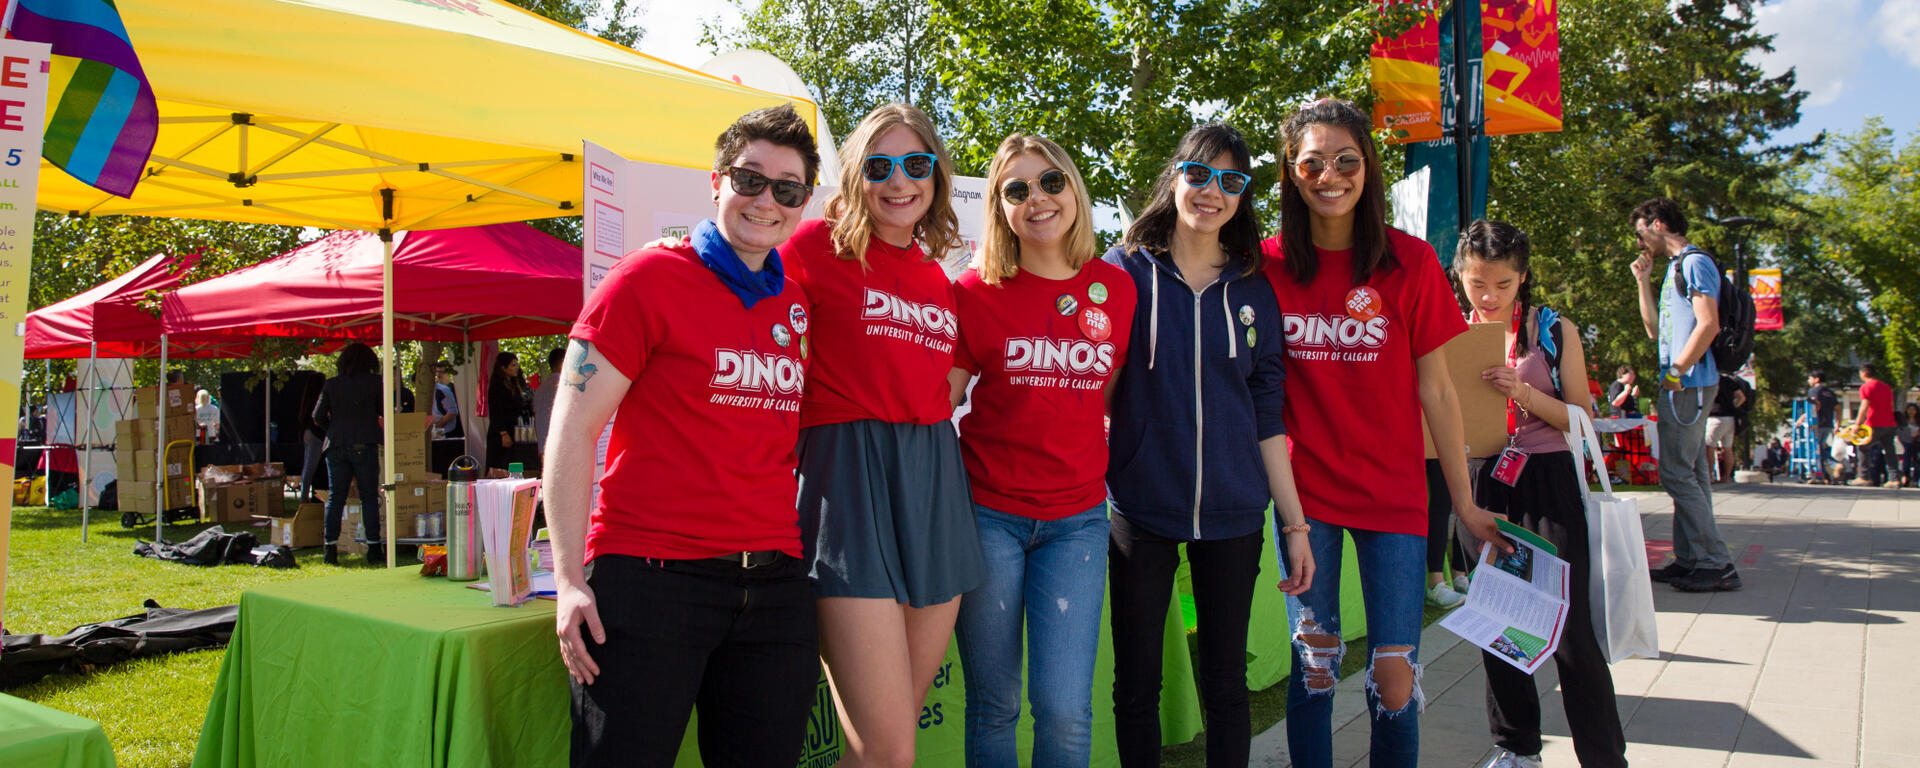 Students pose for photo in Dinos red shirts